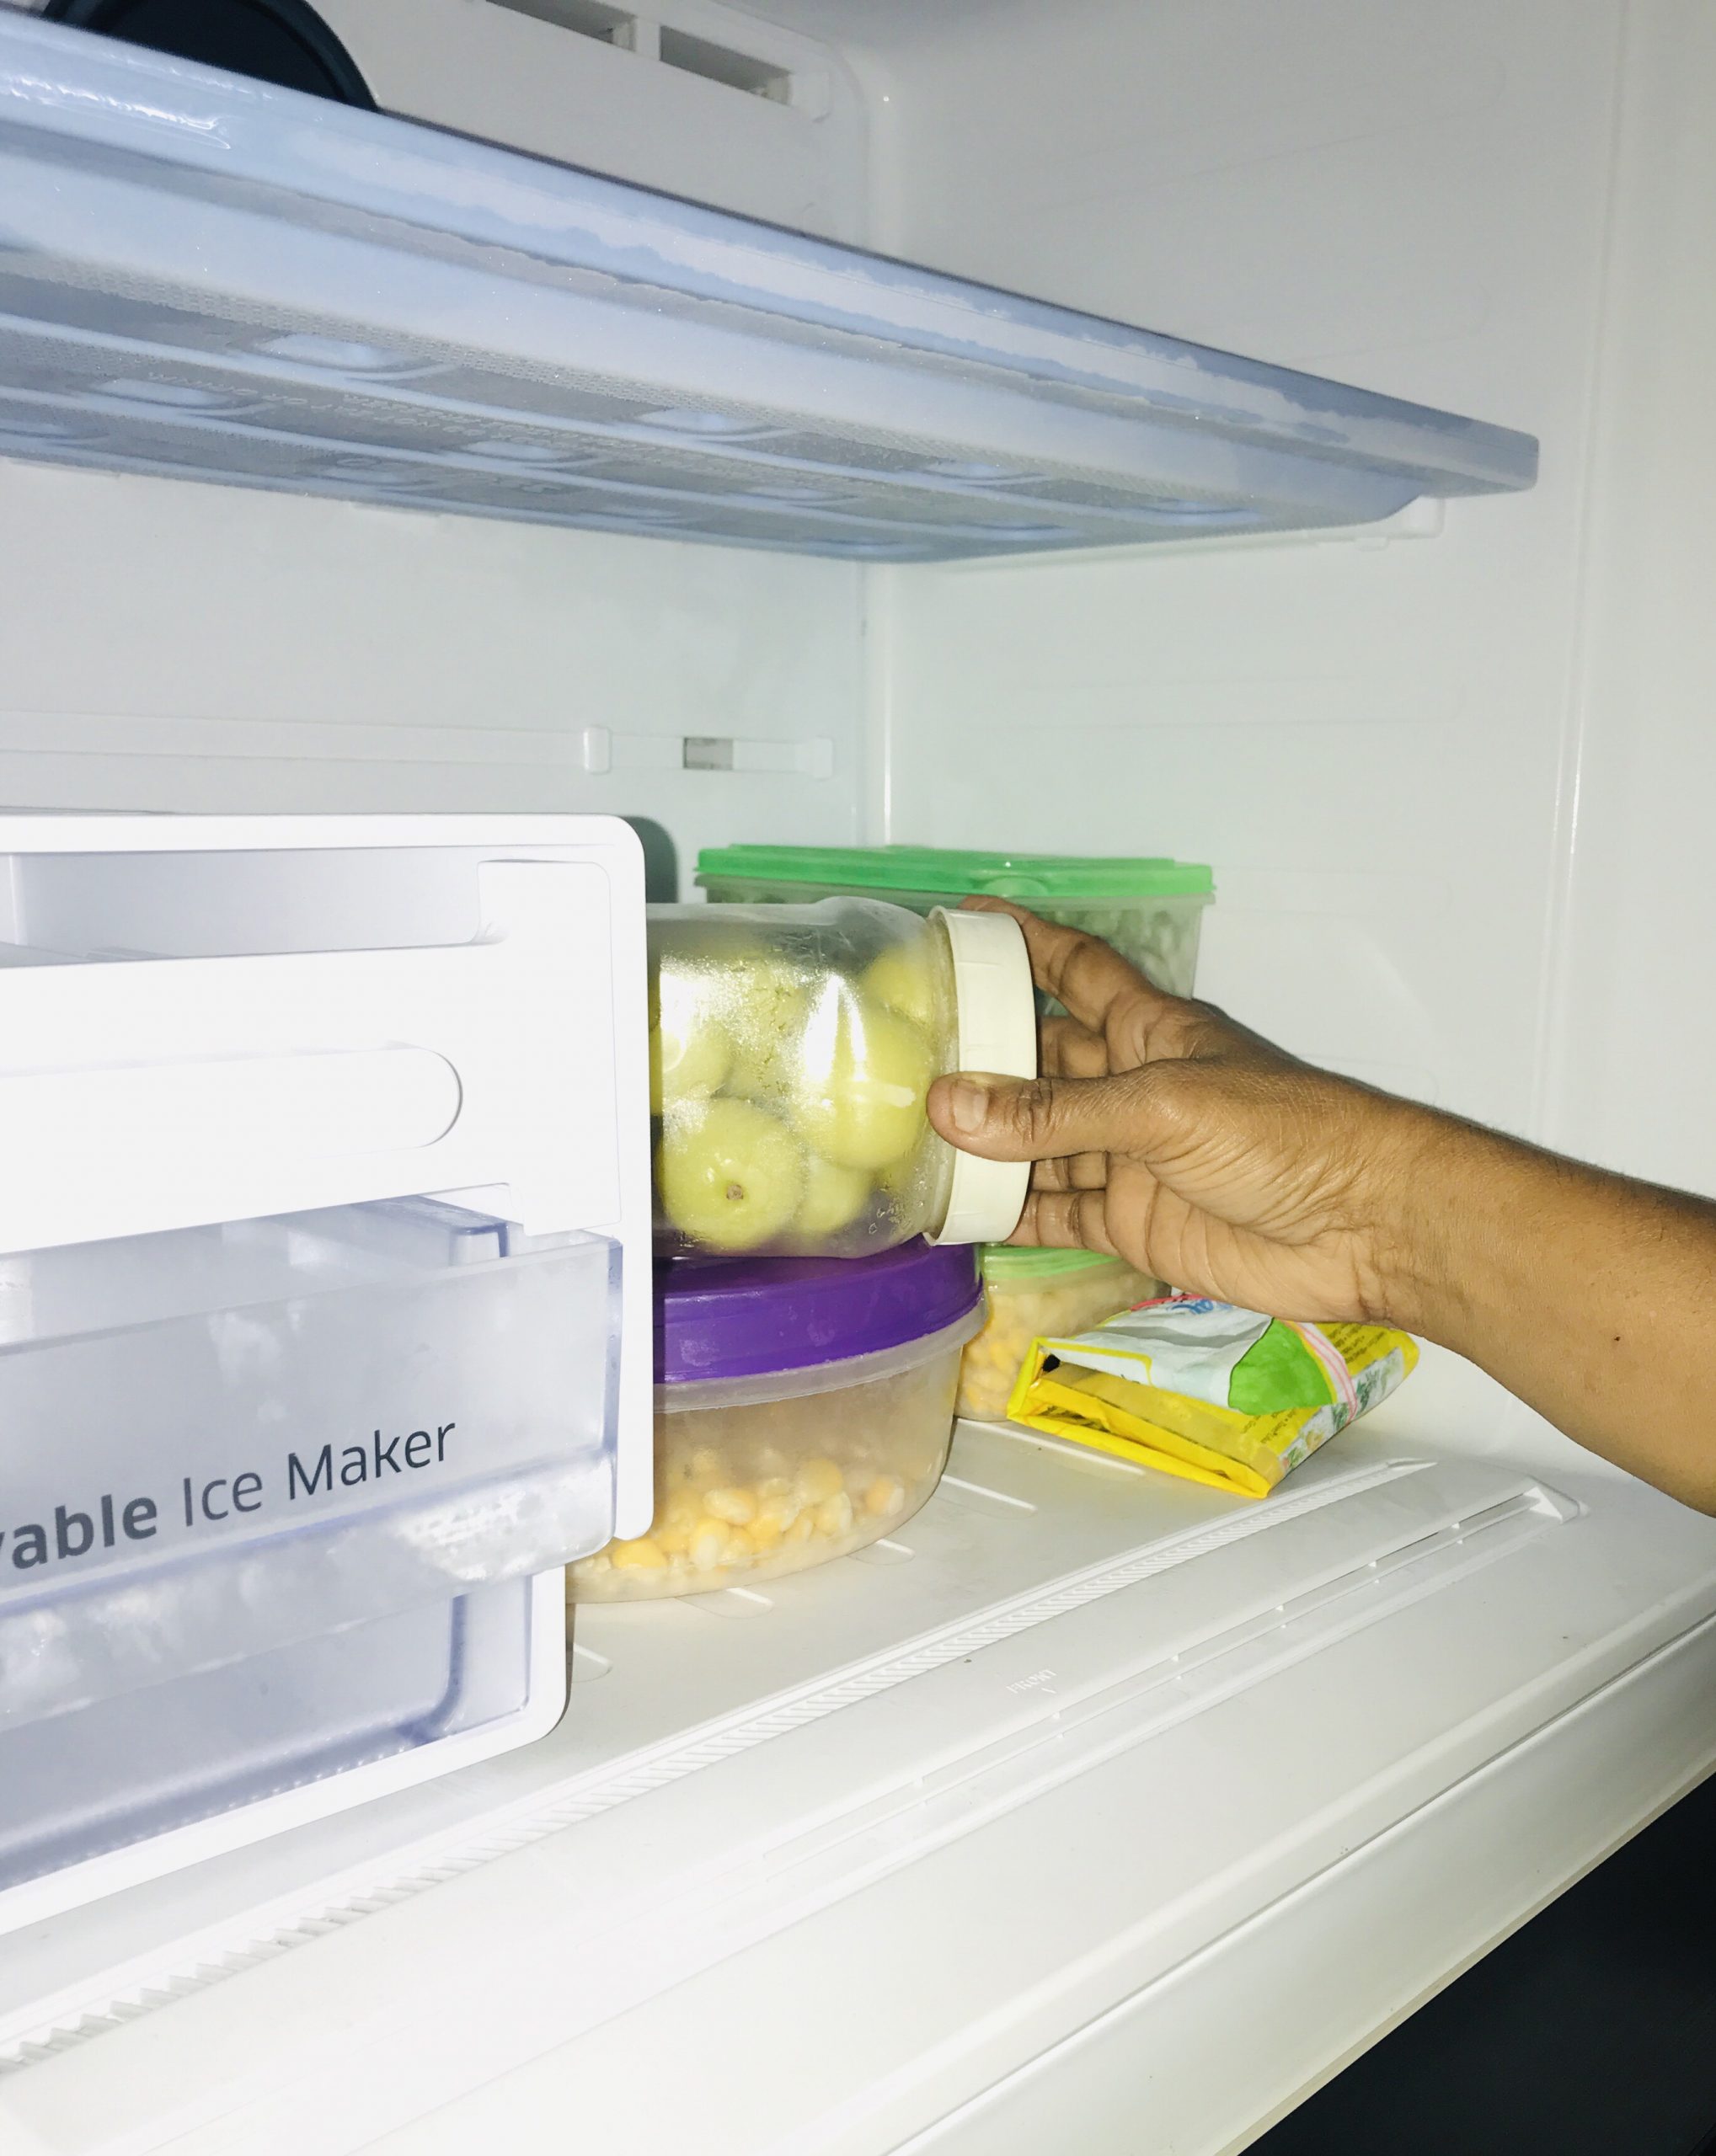 Ever wondered why your fridge has a light but your freezer doesn't?